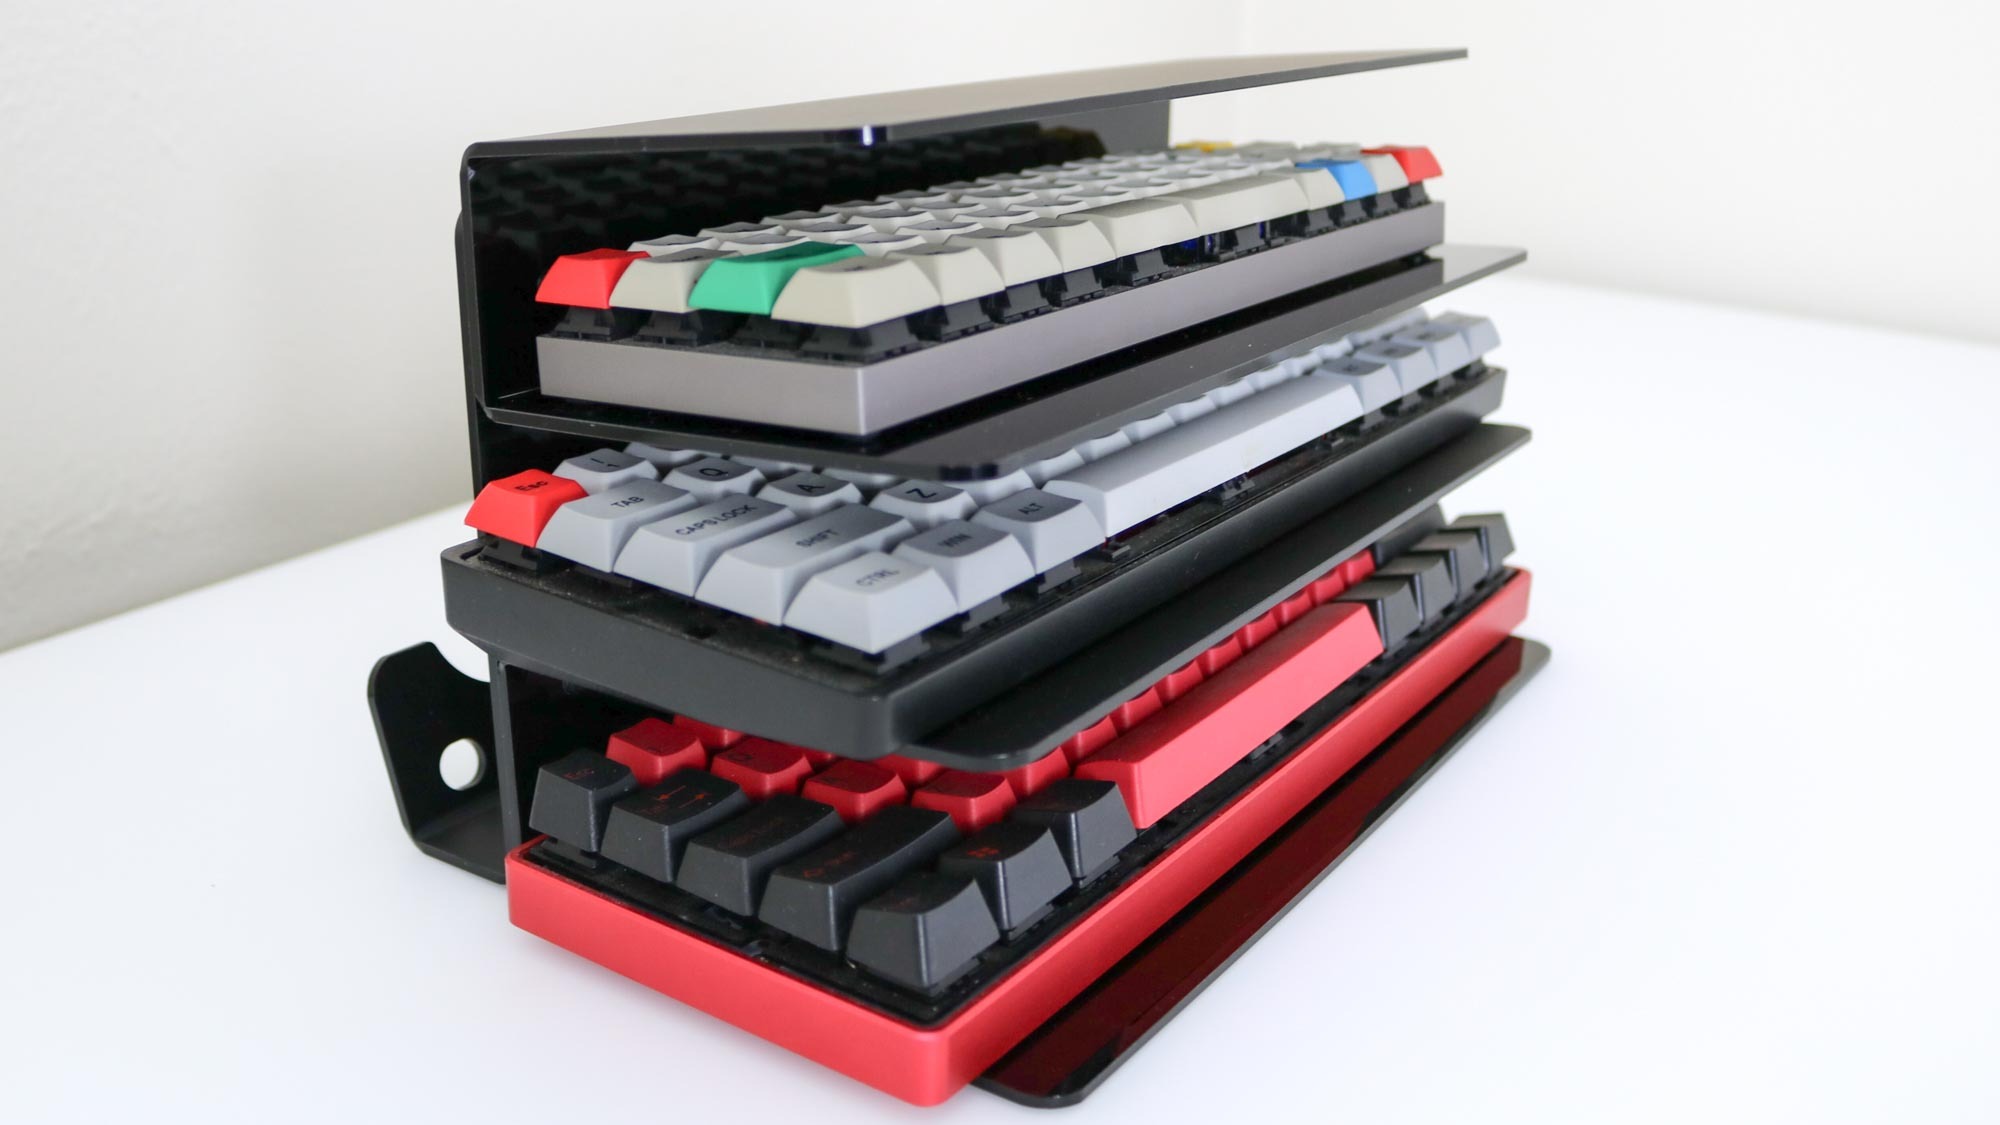 Three keyboards placed on the shelves of a keyboard storage rack